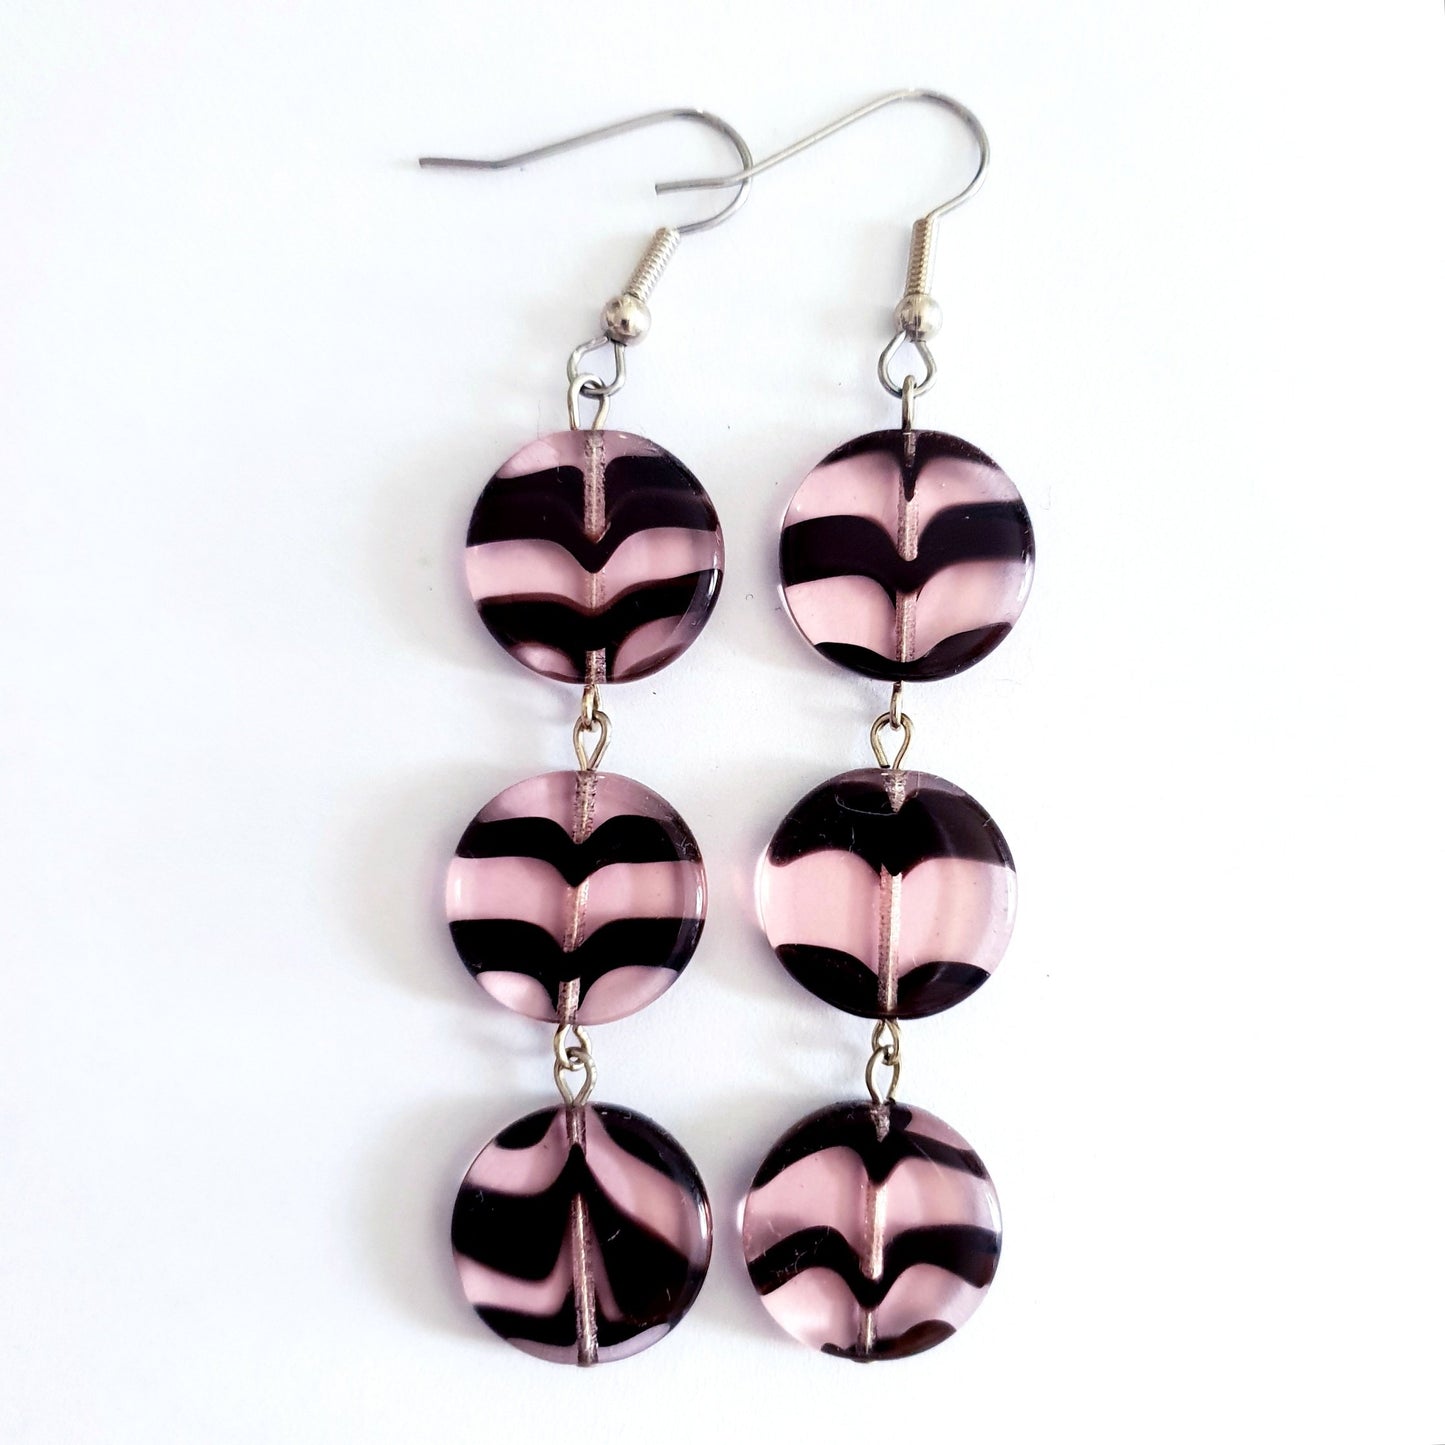 Czech Glass Animal Print Zebra and Surgical Steel Earrings Barely There Pink